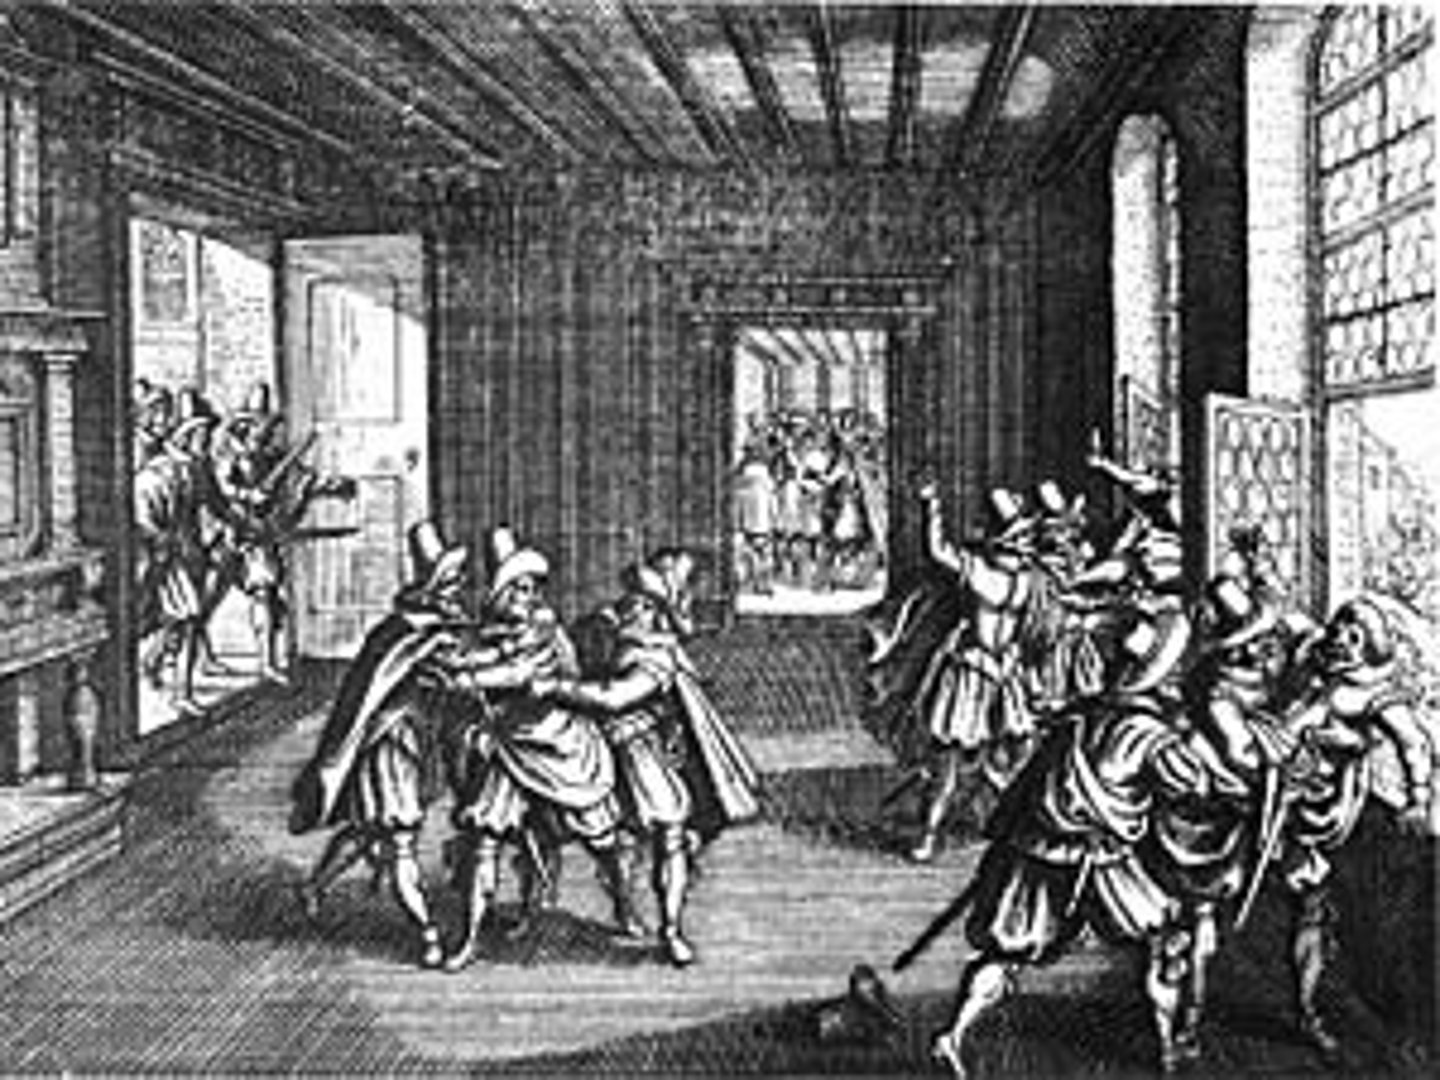 <p>The throwing of Catholic officials from a castle window in Prague, Bohemia. Did not like the Peace of Augsburg, wanted to be Protestant but Habsburg leader was Catholic</p>